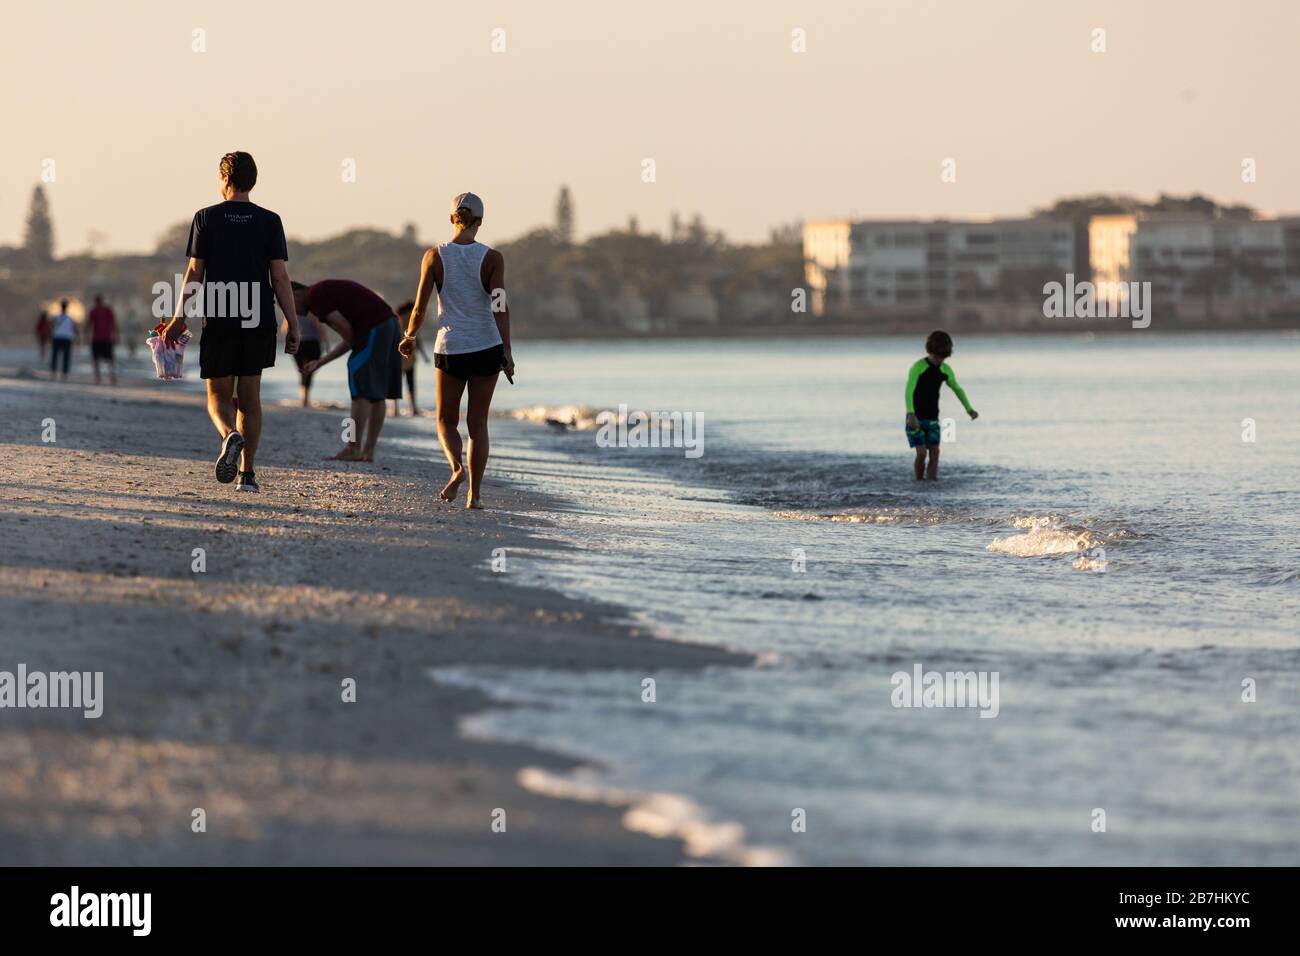 People gather on the beach at Lido Key just after sunrise on March 16, 2020 in Sarasota FL, USA. Stock Photo